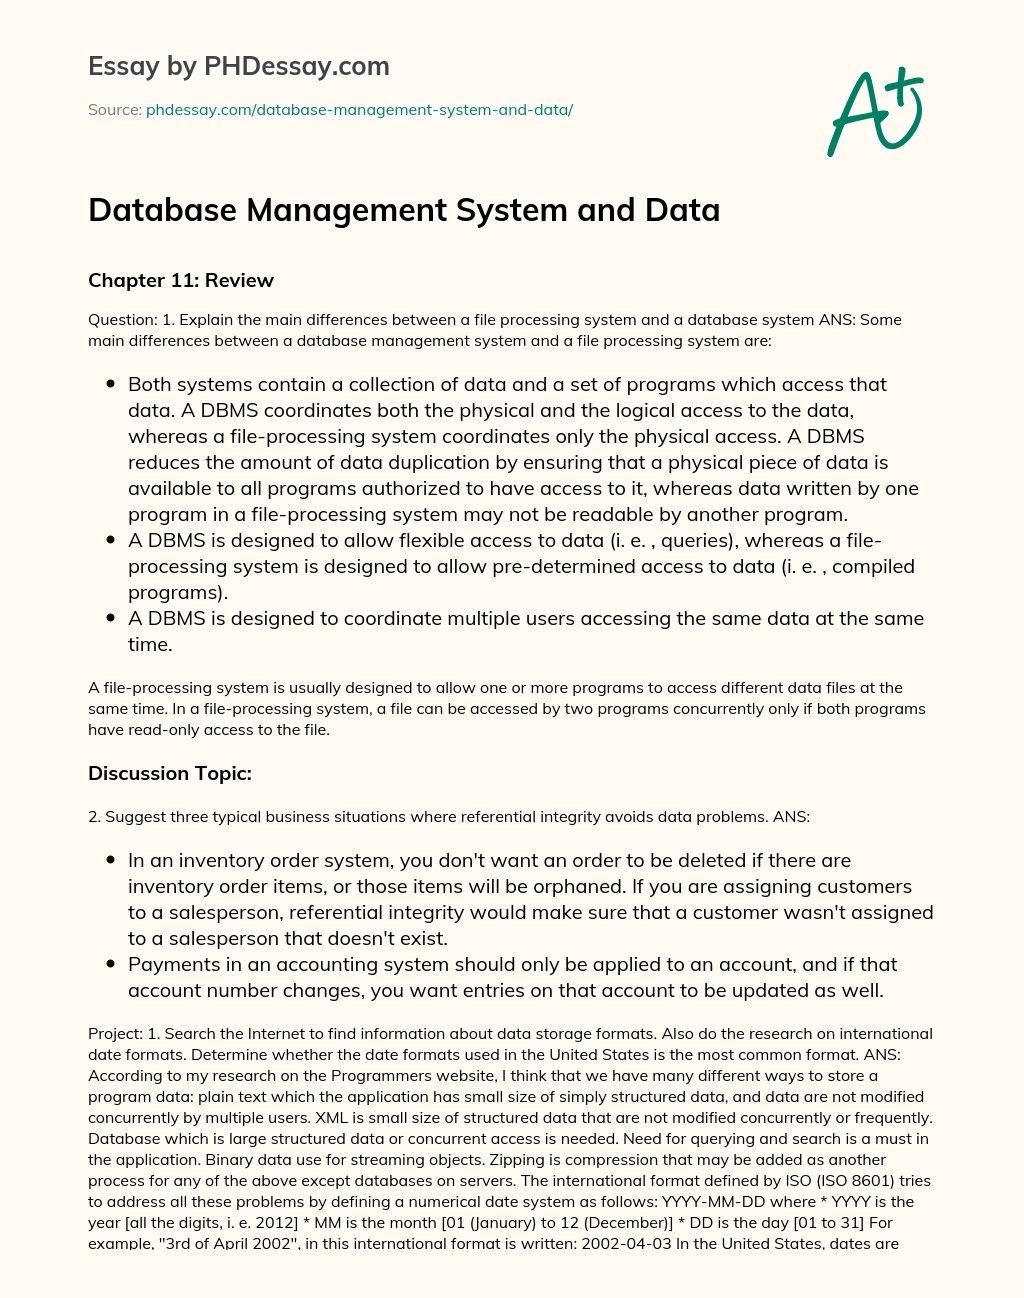 Database Management System and Data essay